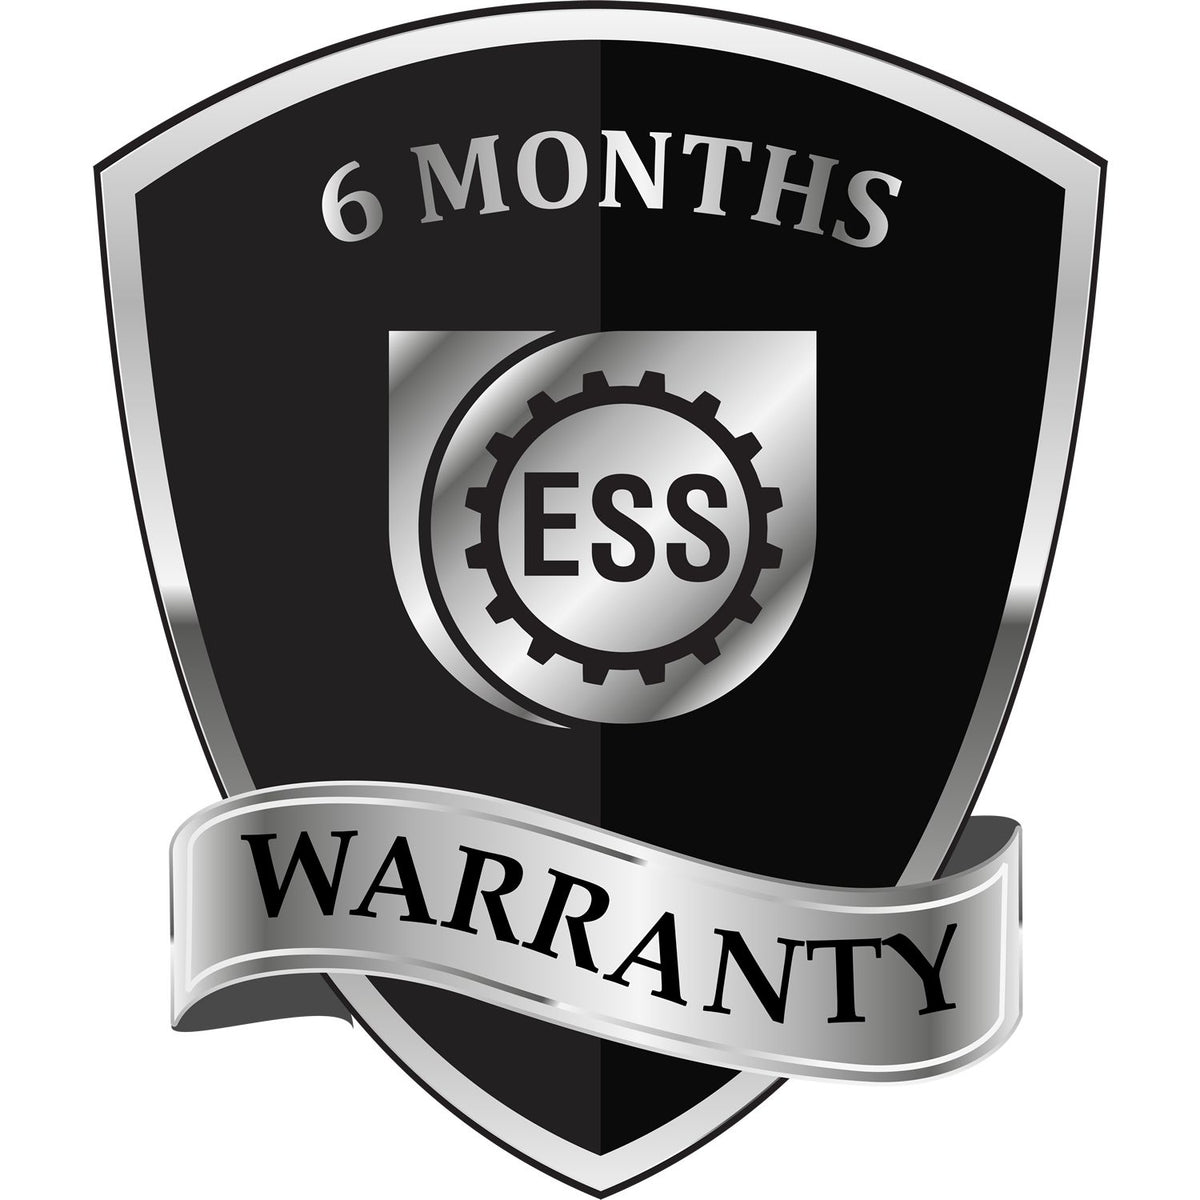 A badge or emblem showing a warranty icon for the Massachusetts Landscape Architectural Seal Stamp